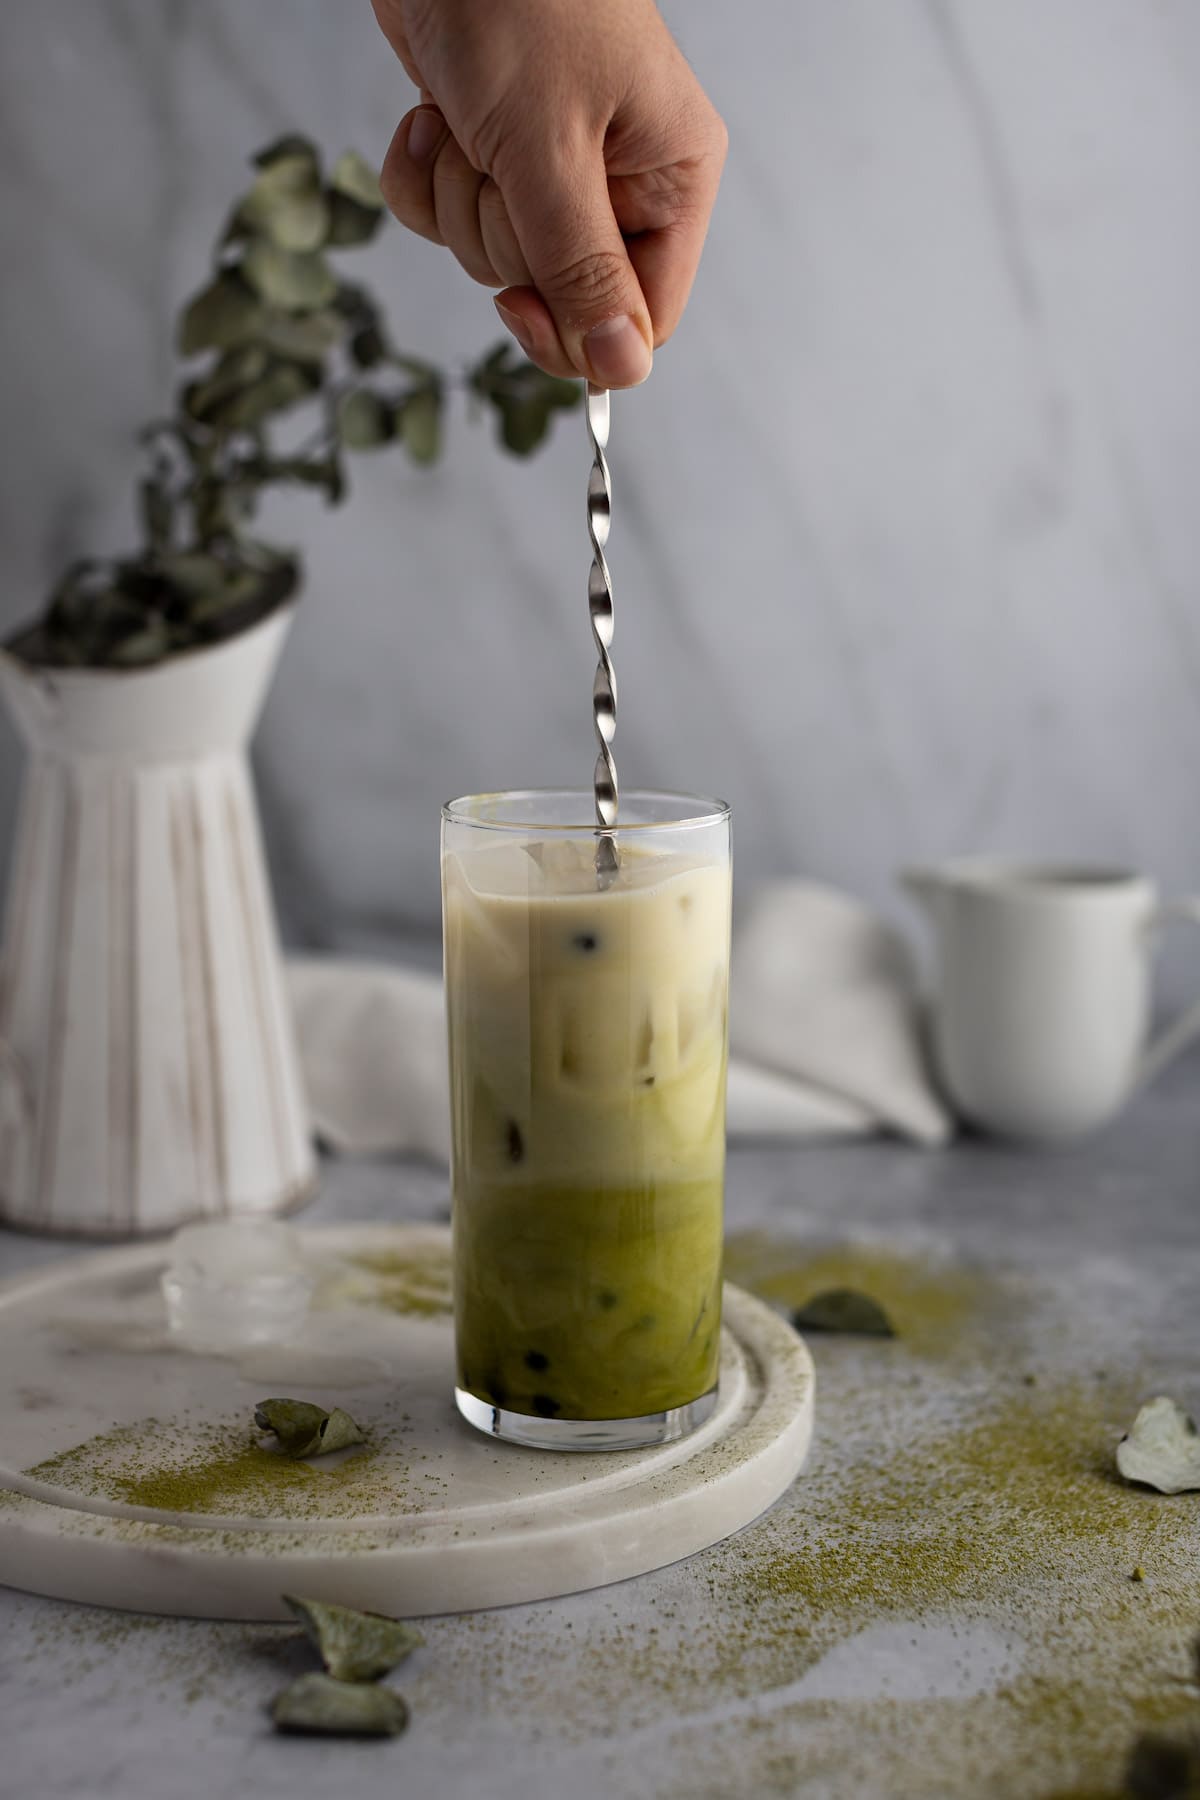 A hand holding a long metal spoon and stirring the almond milk into the matcha boba tea.